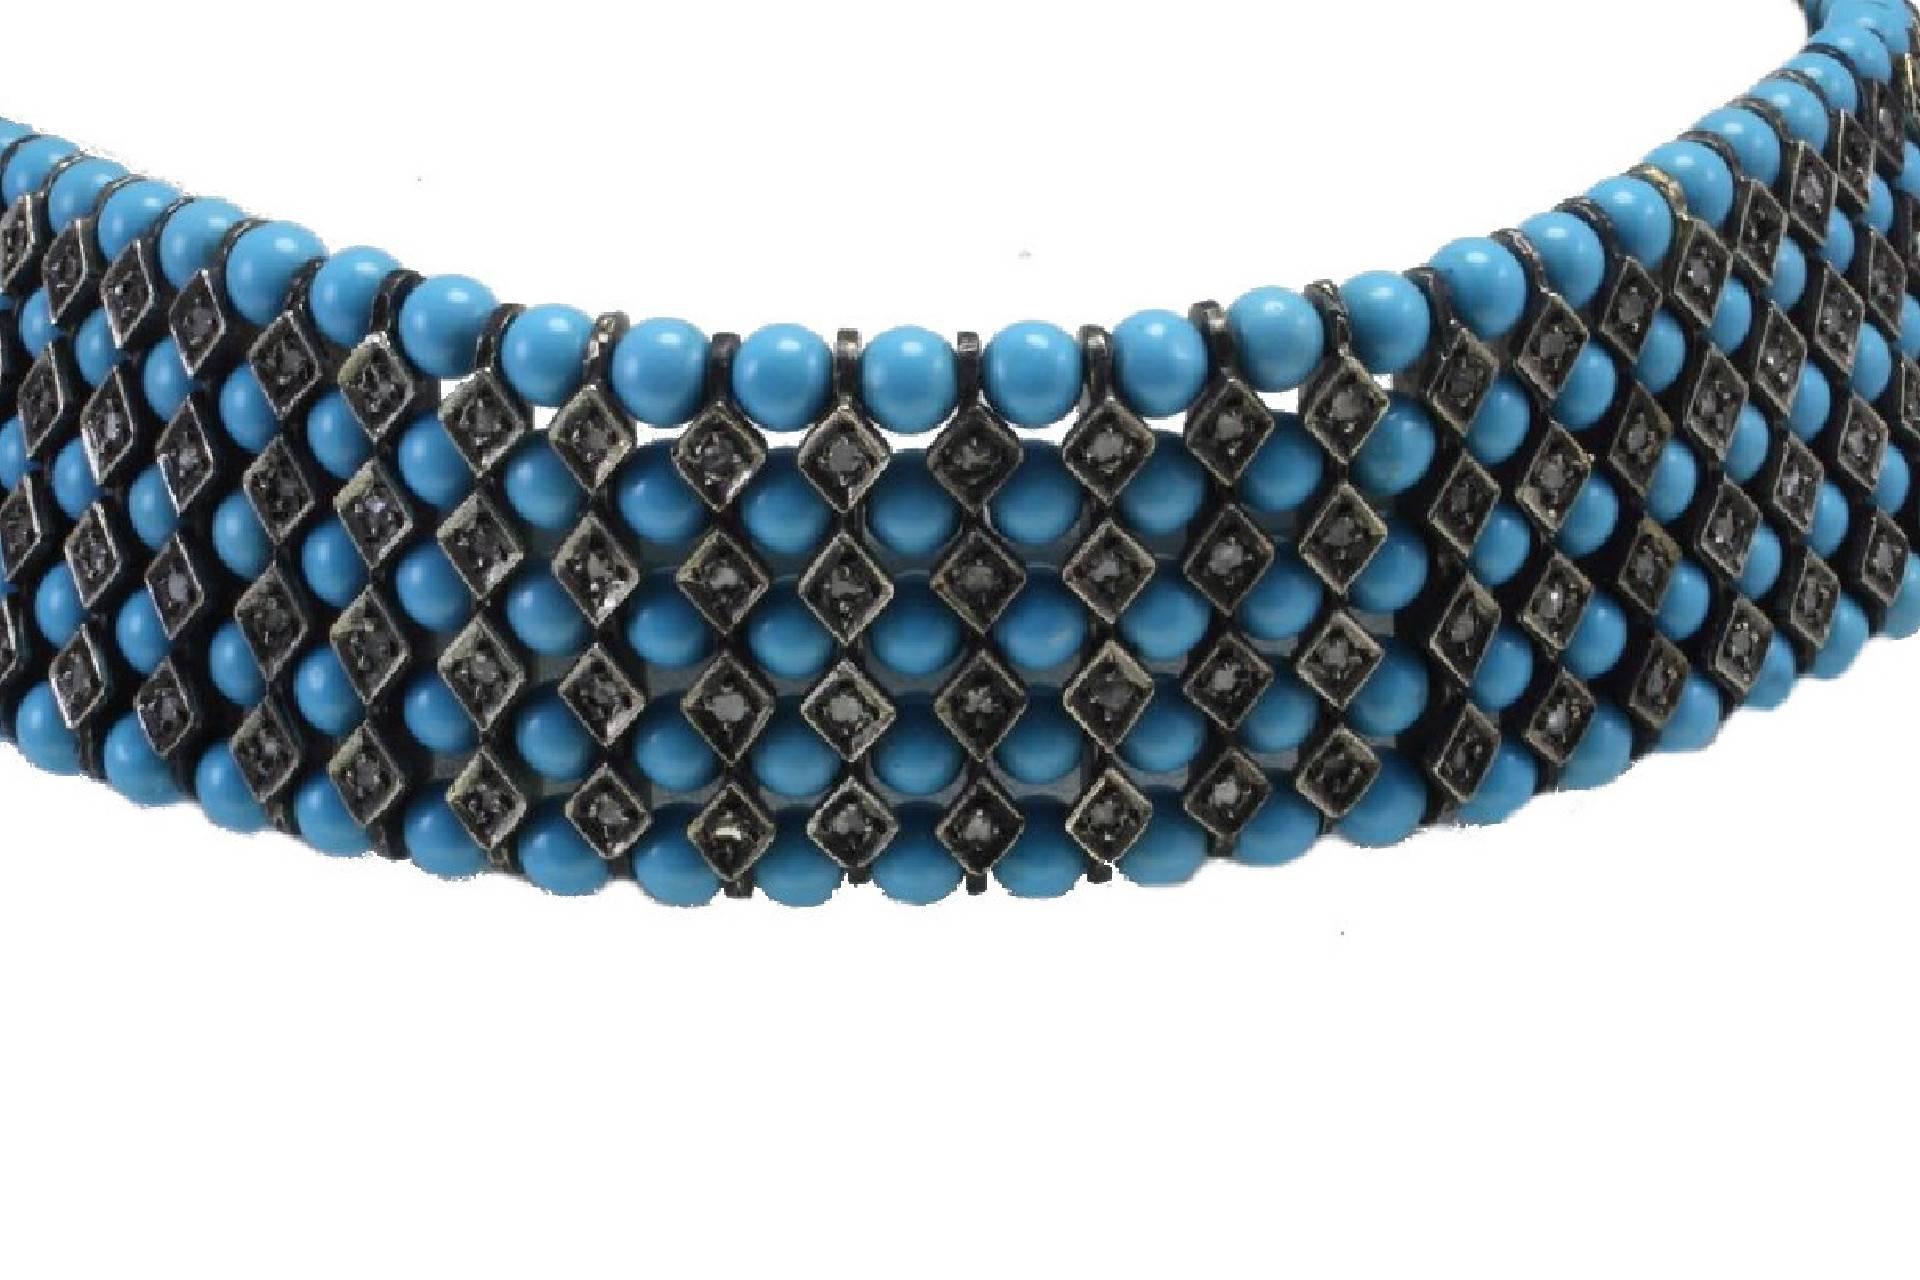 Turquoise paste choker necklace in 9kt yellow gold and silver embellished with diamonds.

diamonds 2.95kt
tot weight 95.2gr
r.f.  goee